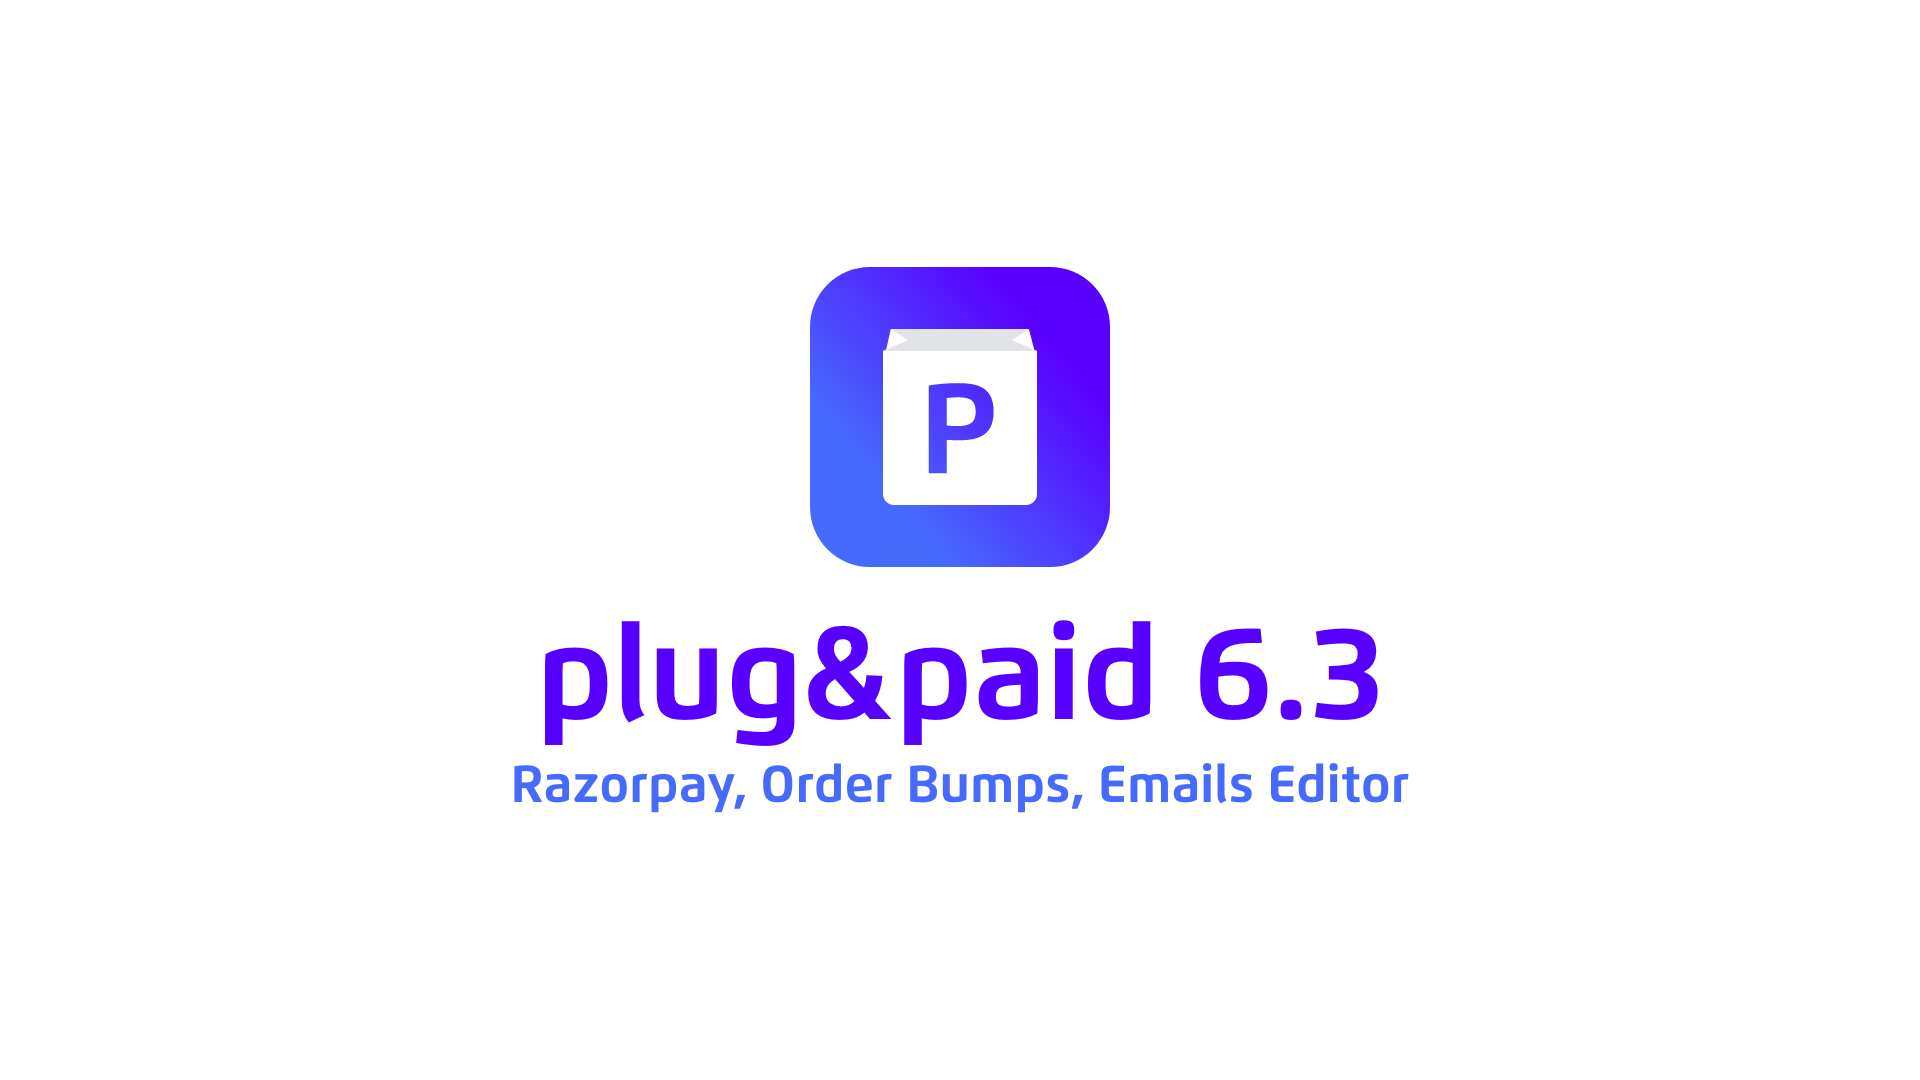 Release 6.3 - Razorpay, Order Bumps, Emails Editor